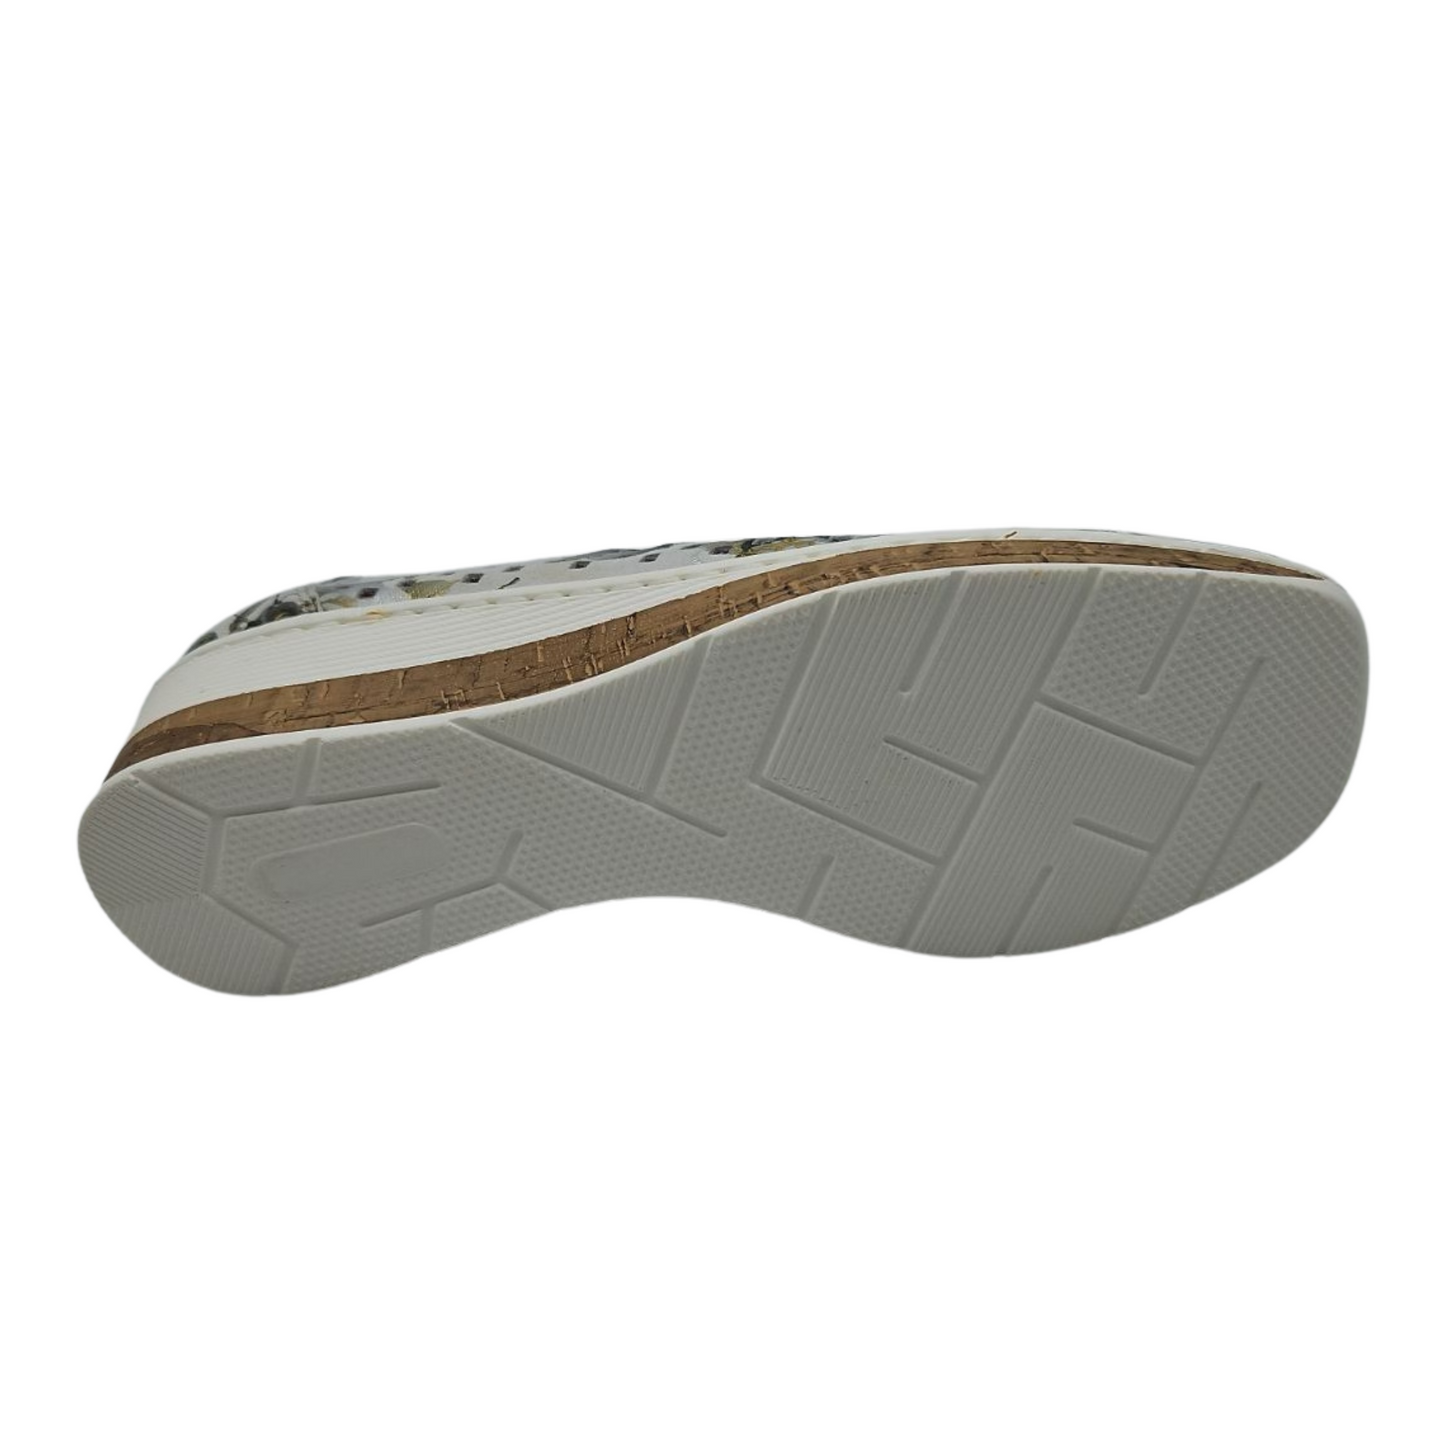 Bottom view of perforated leather shoe with padded footbed